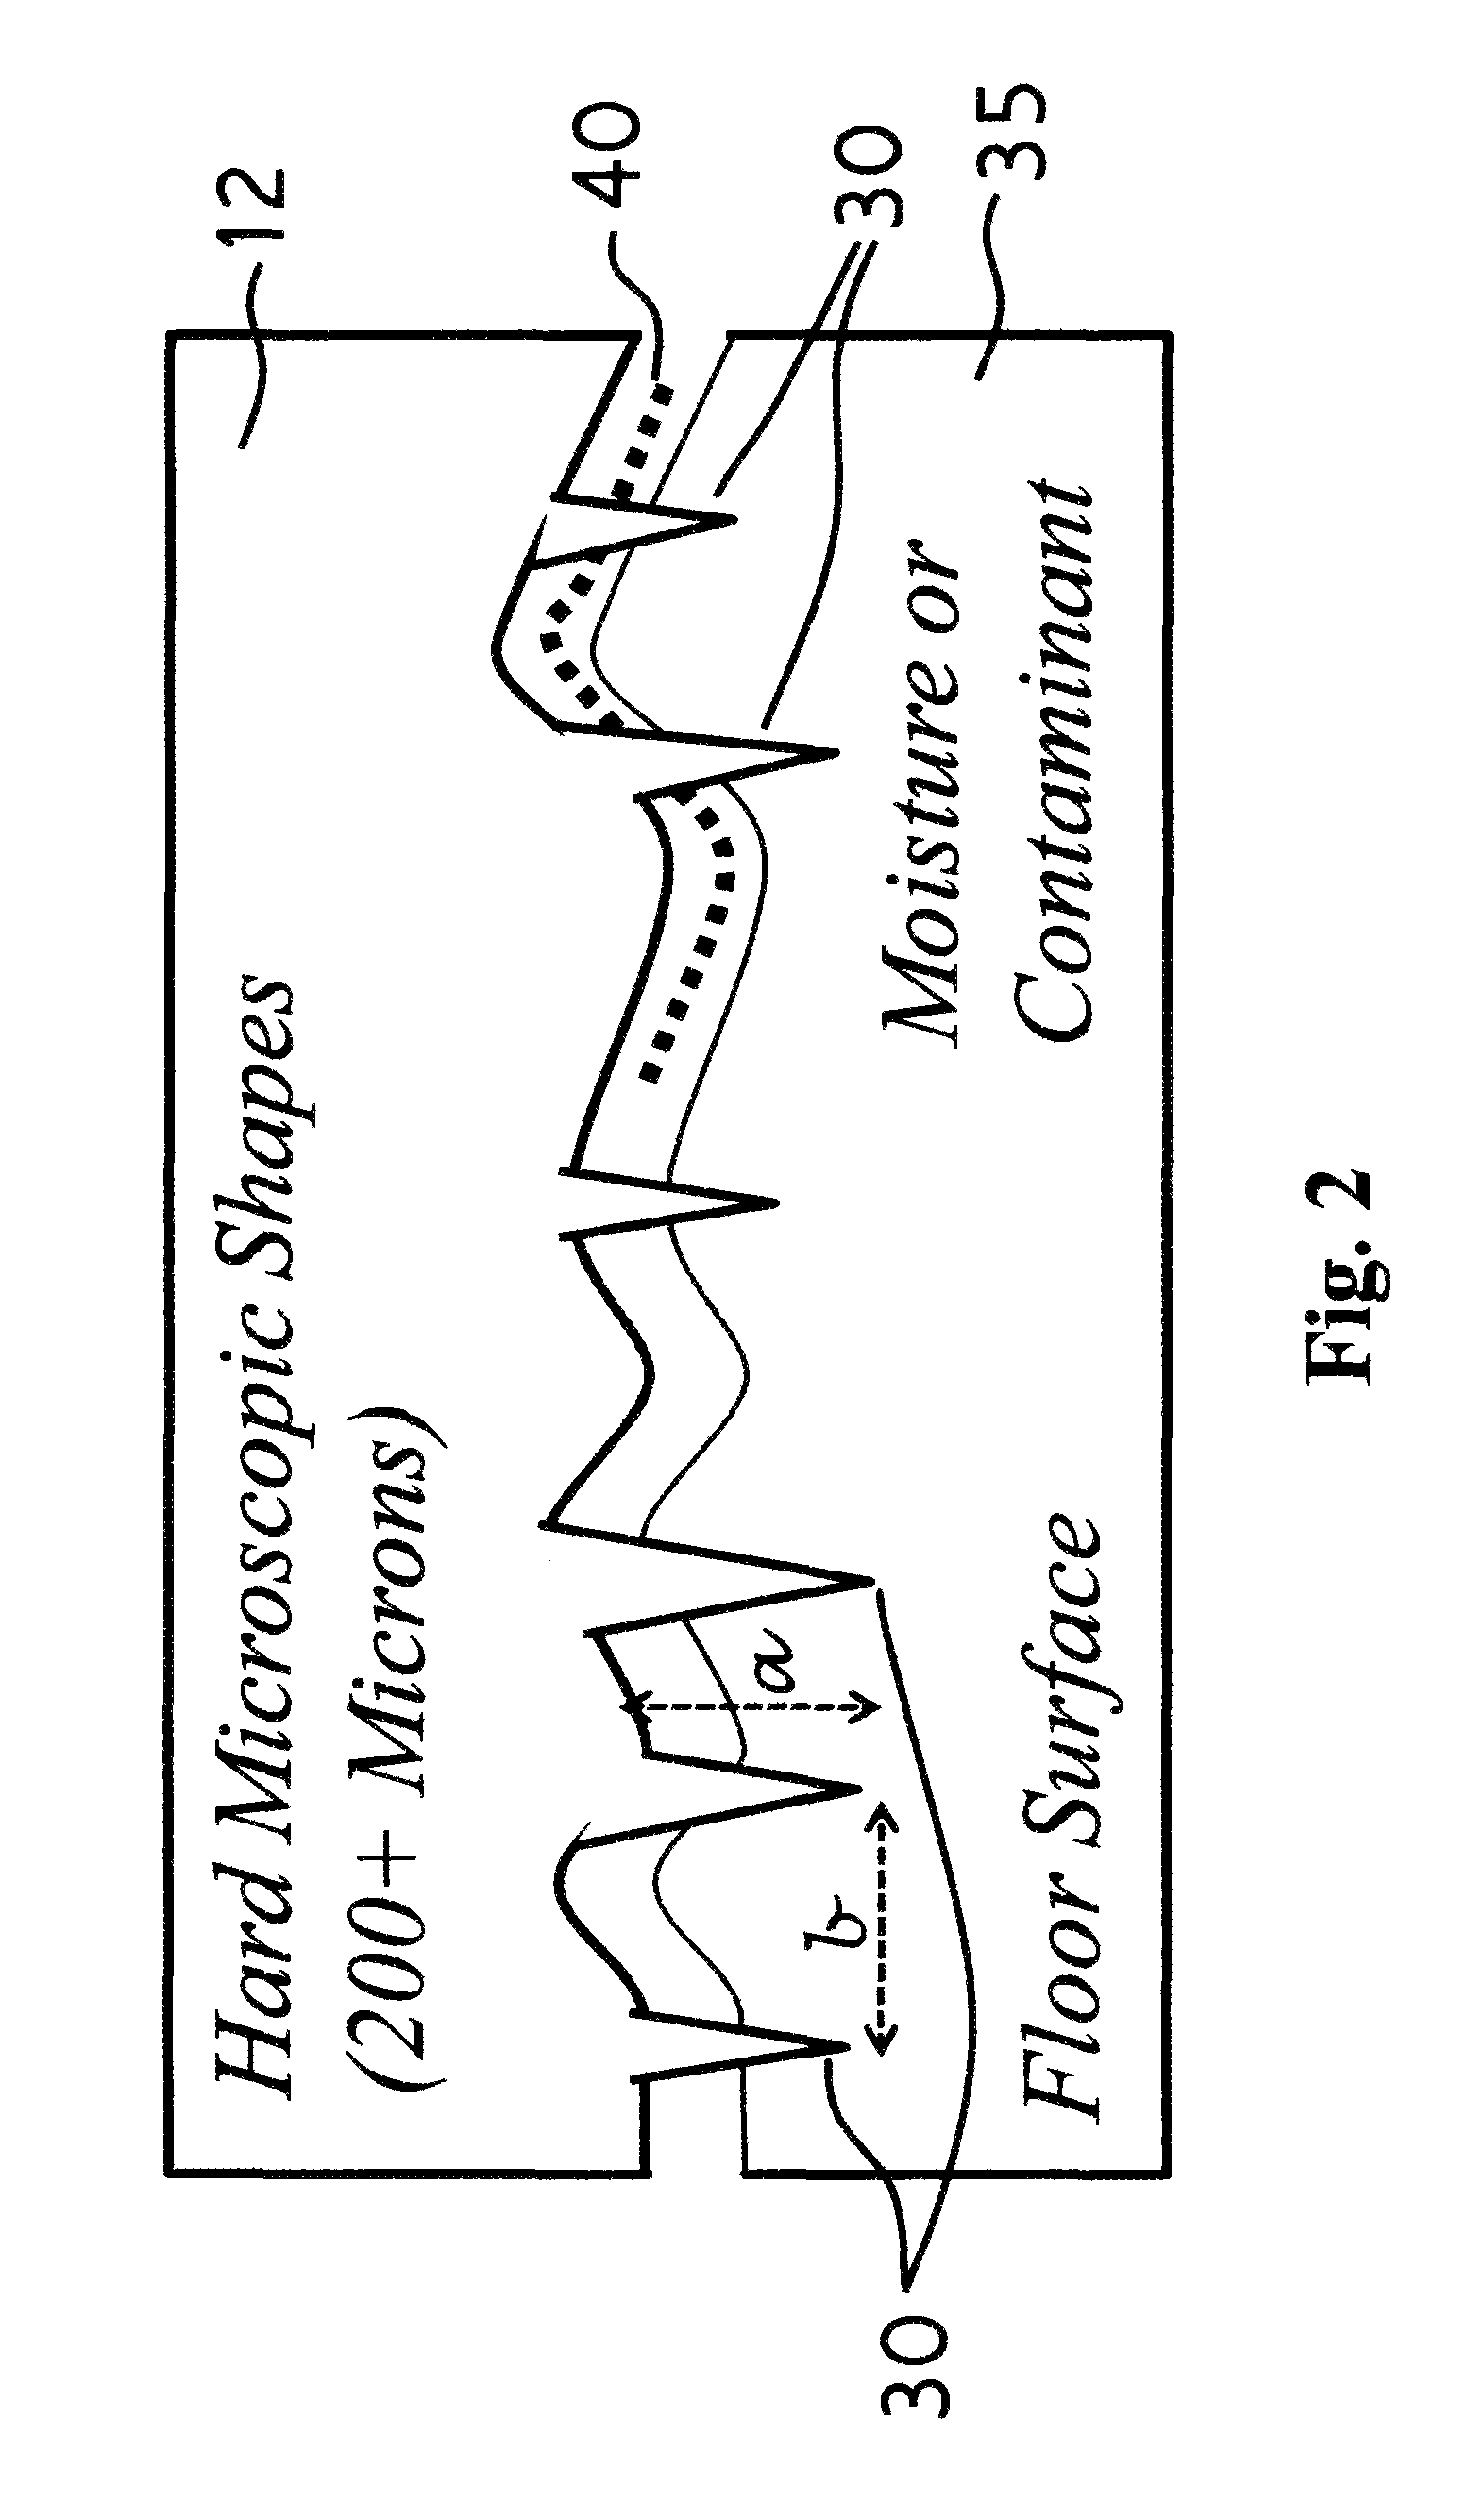 Footwear safety apparatus, device, and method